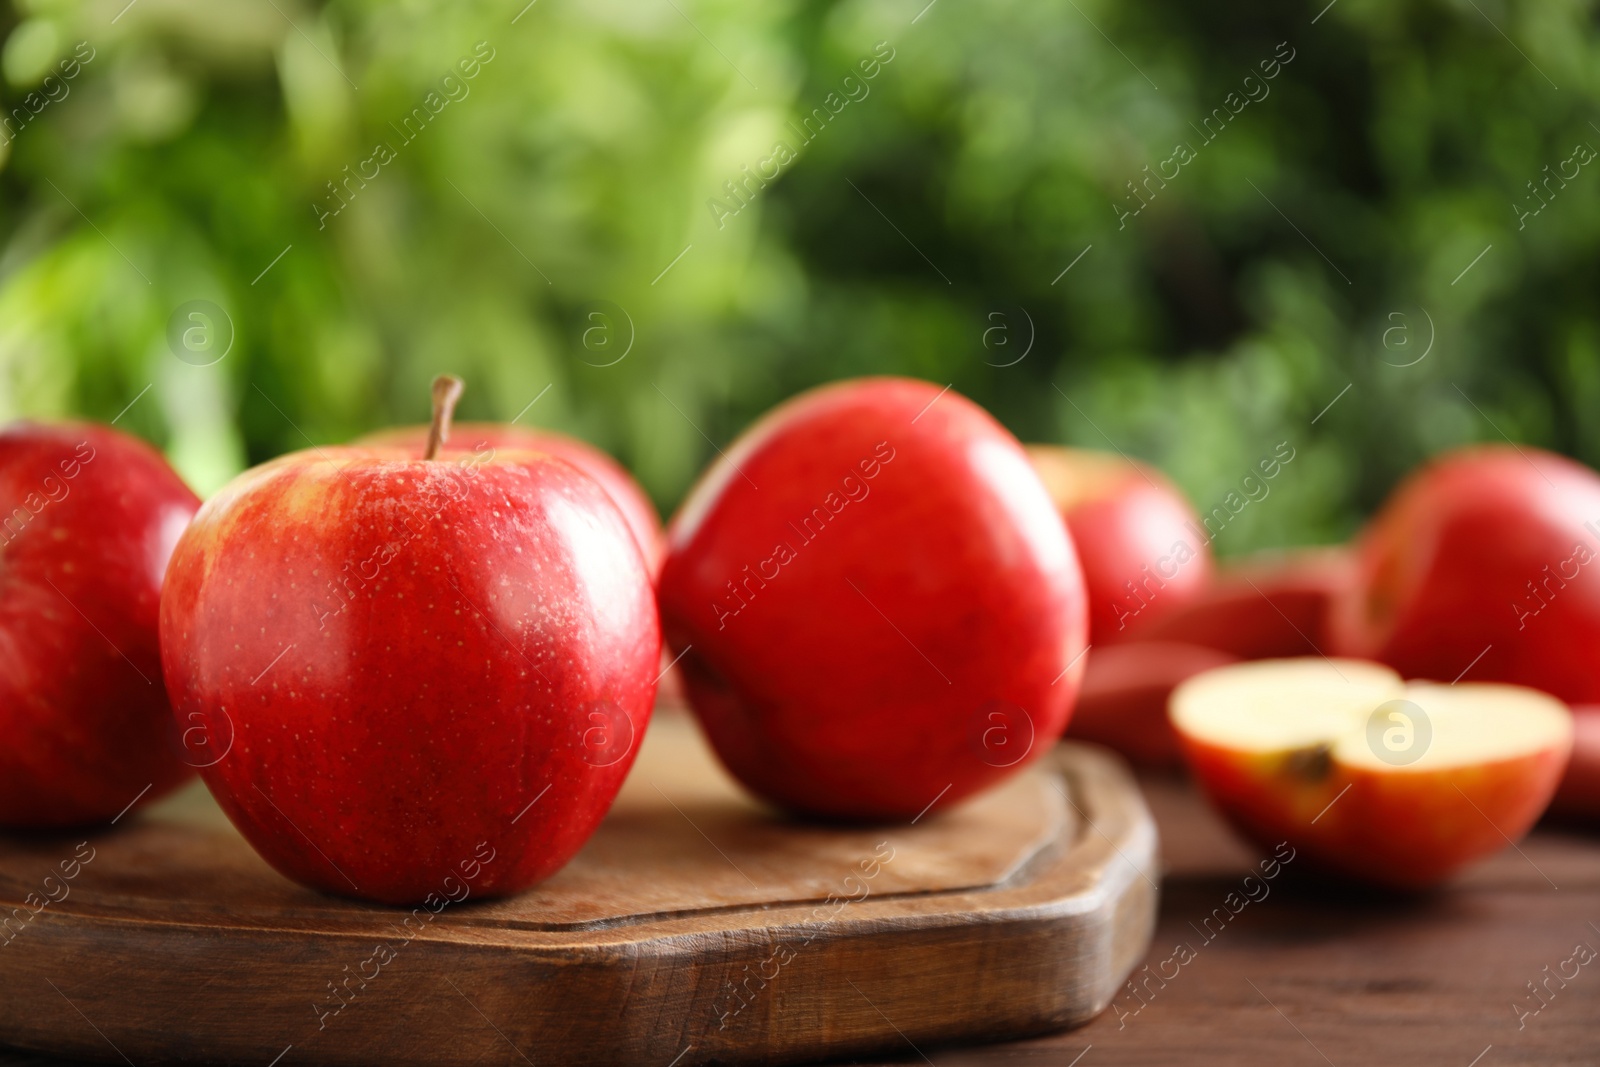 Photo of Fresh ripe red apples on wooden table against blurred background. Space for text